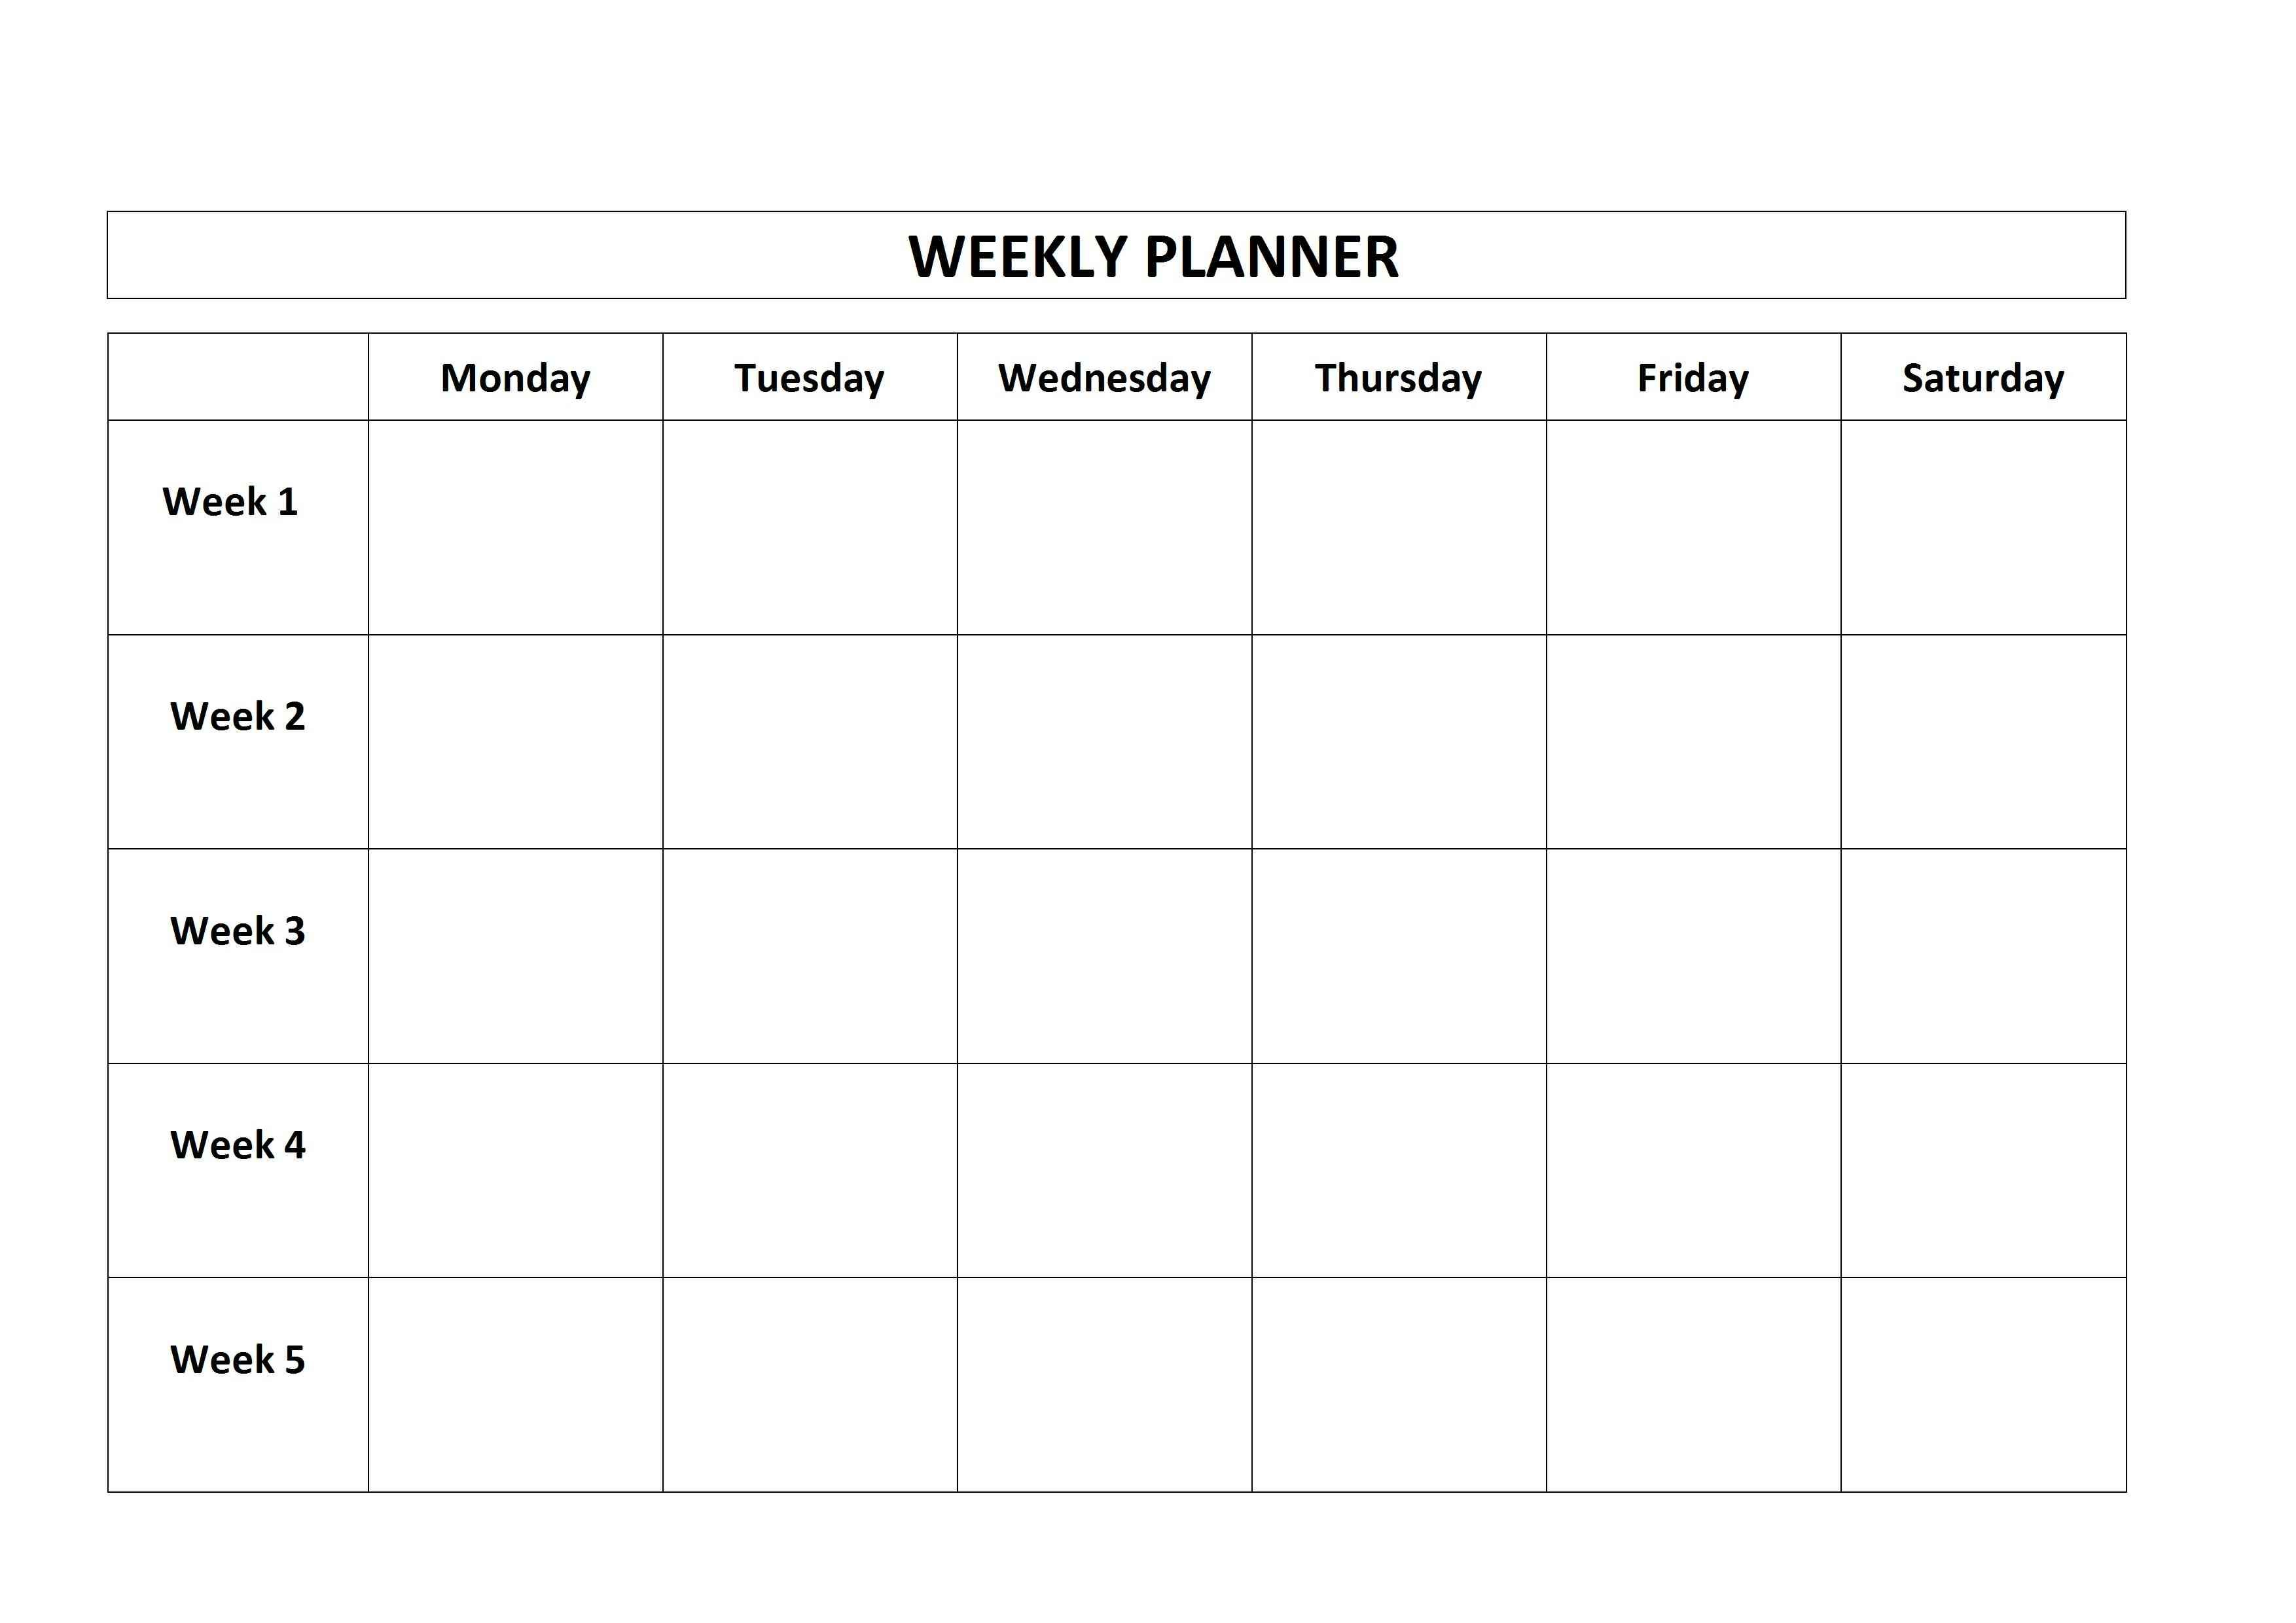 Monday To Friday Planner Template Calendar For Planning